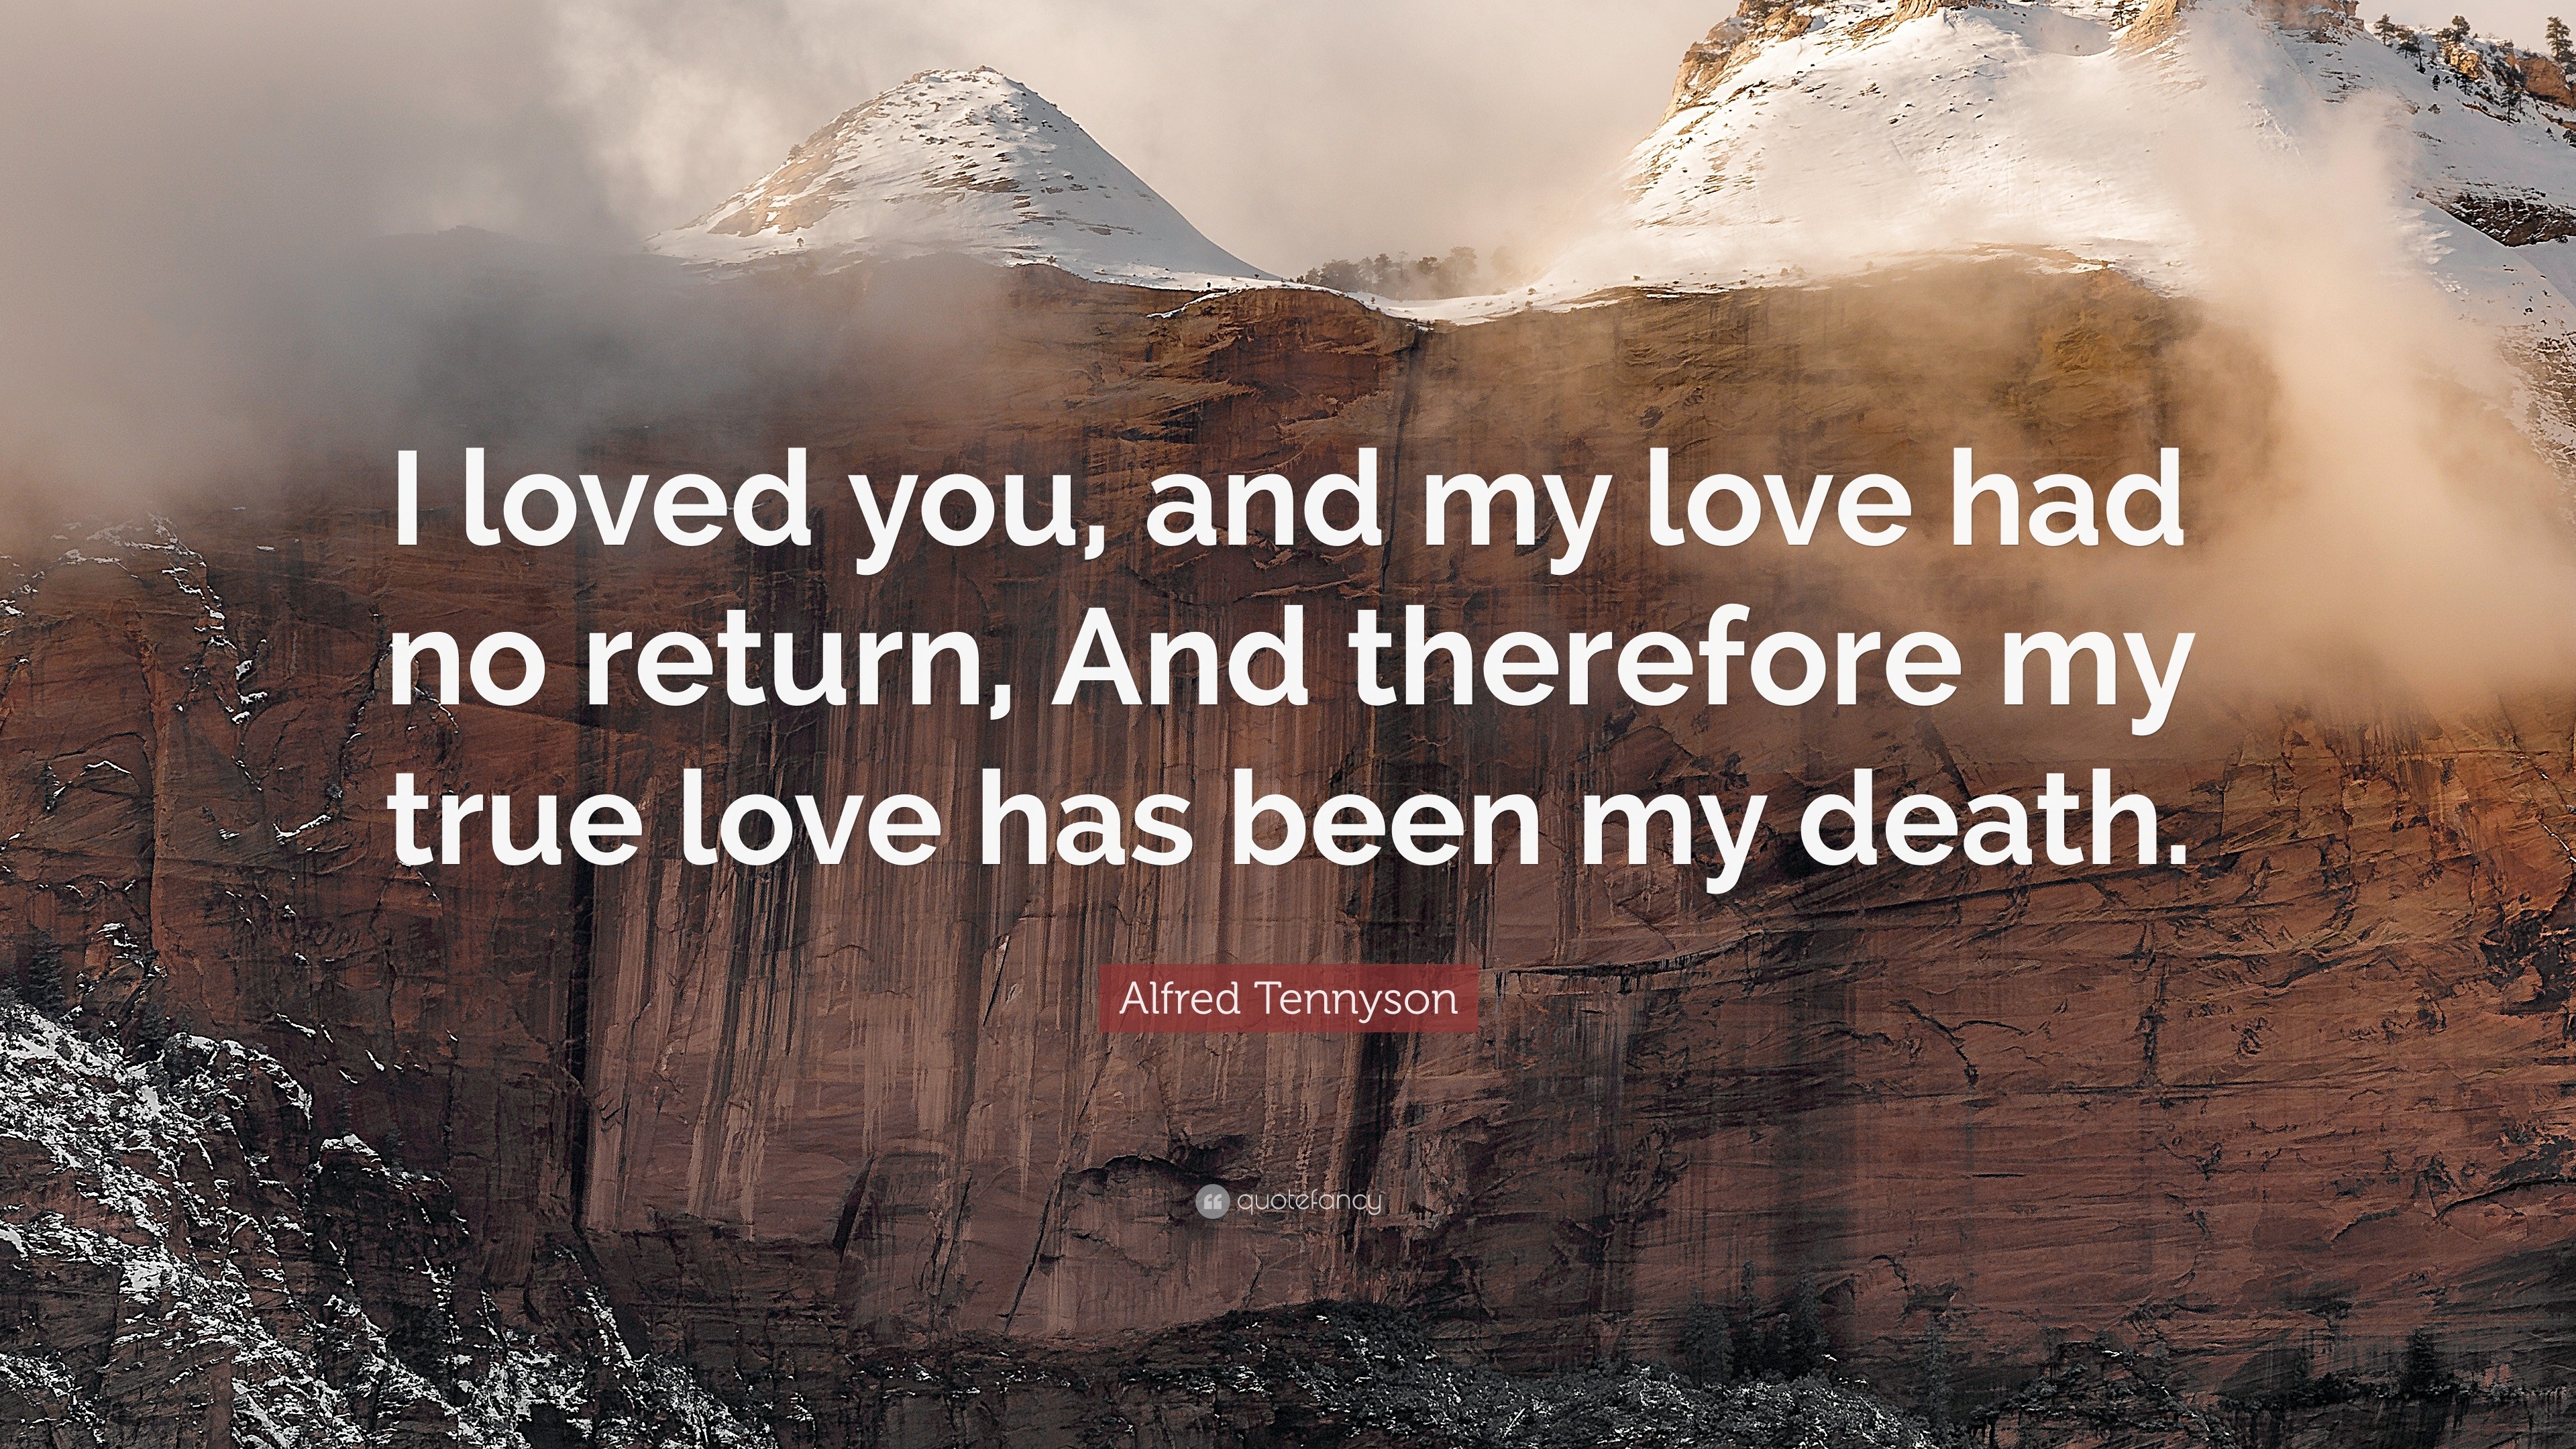 Alfred Tennyson Quote “I loved you and my love had no return